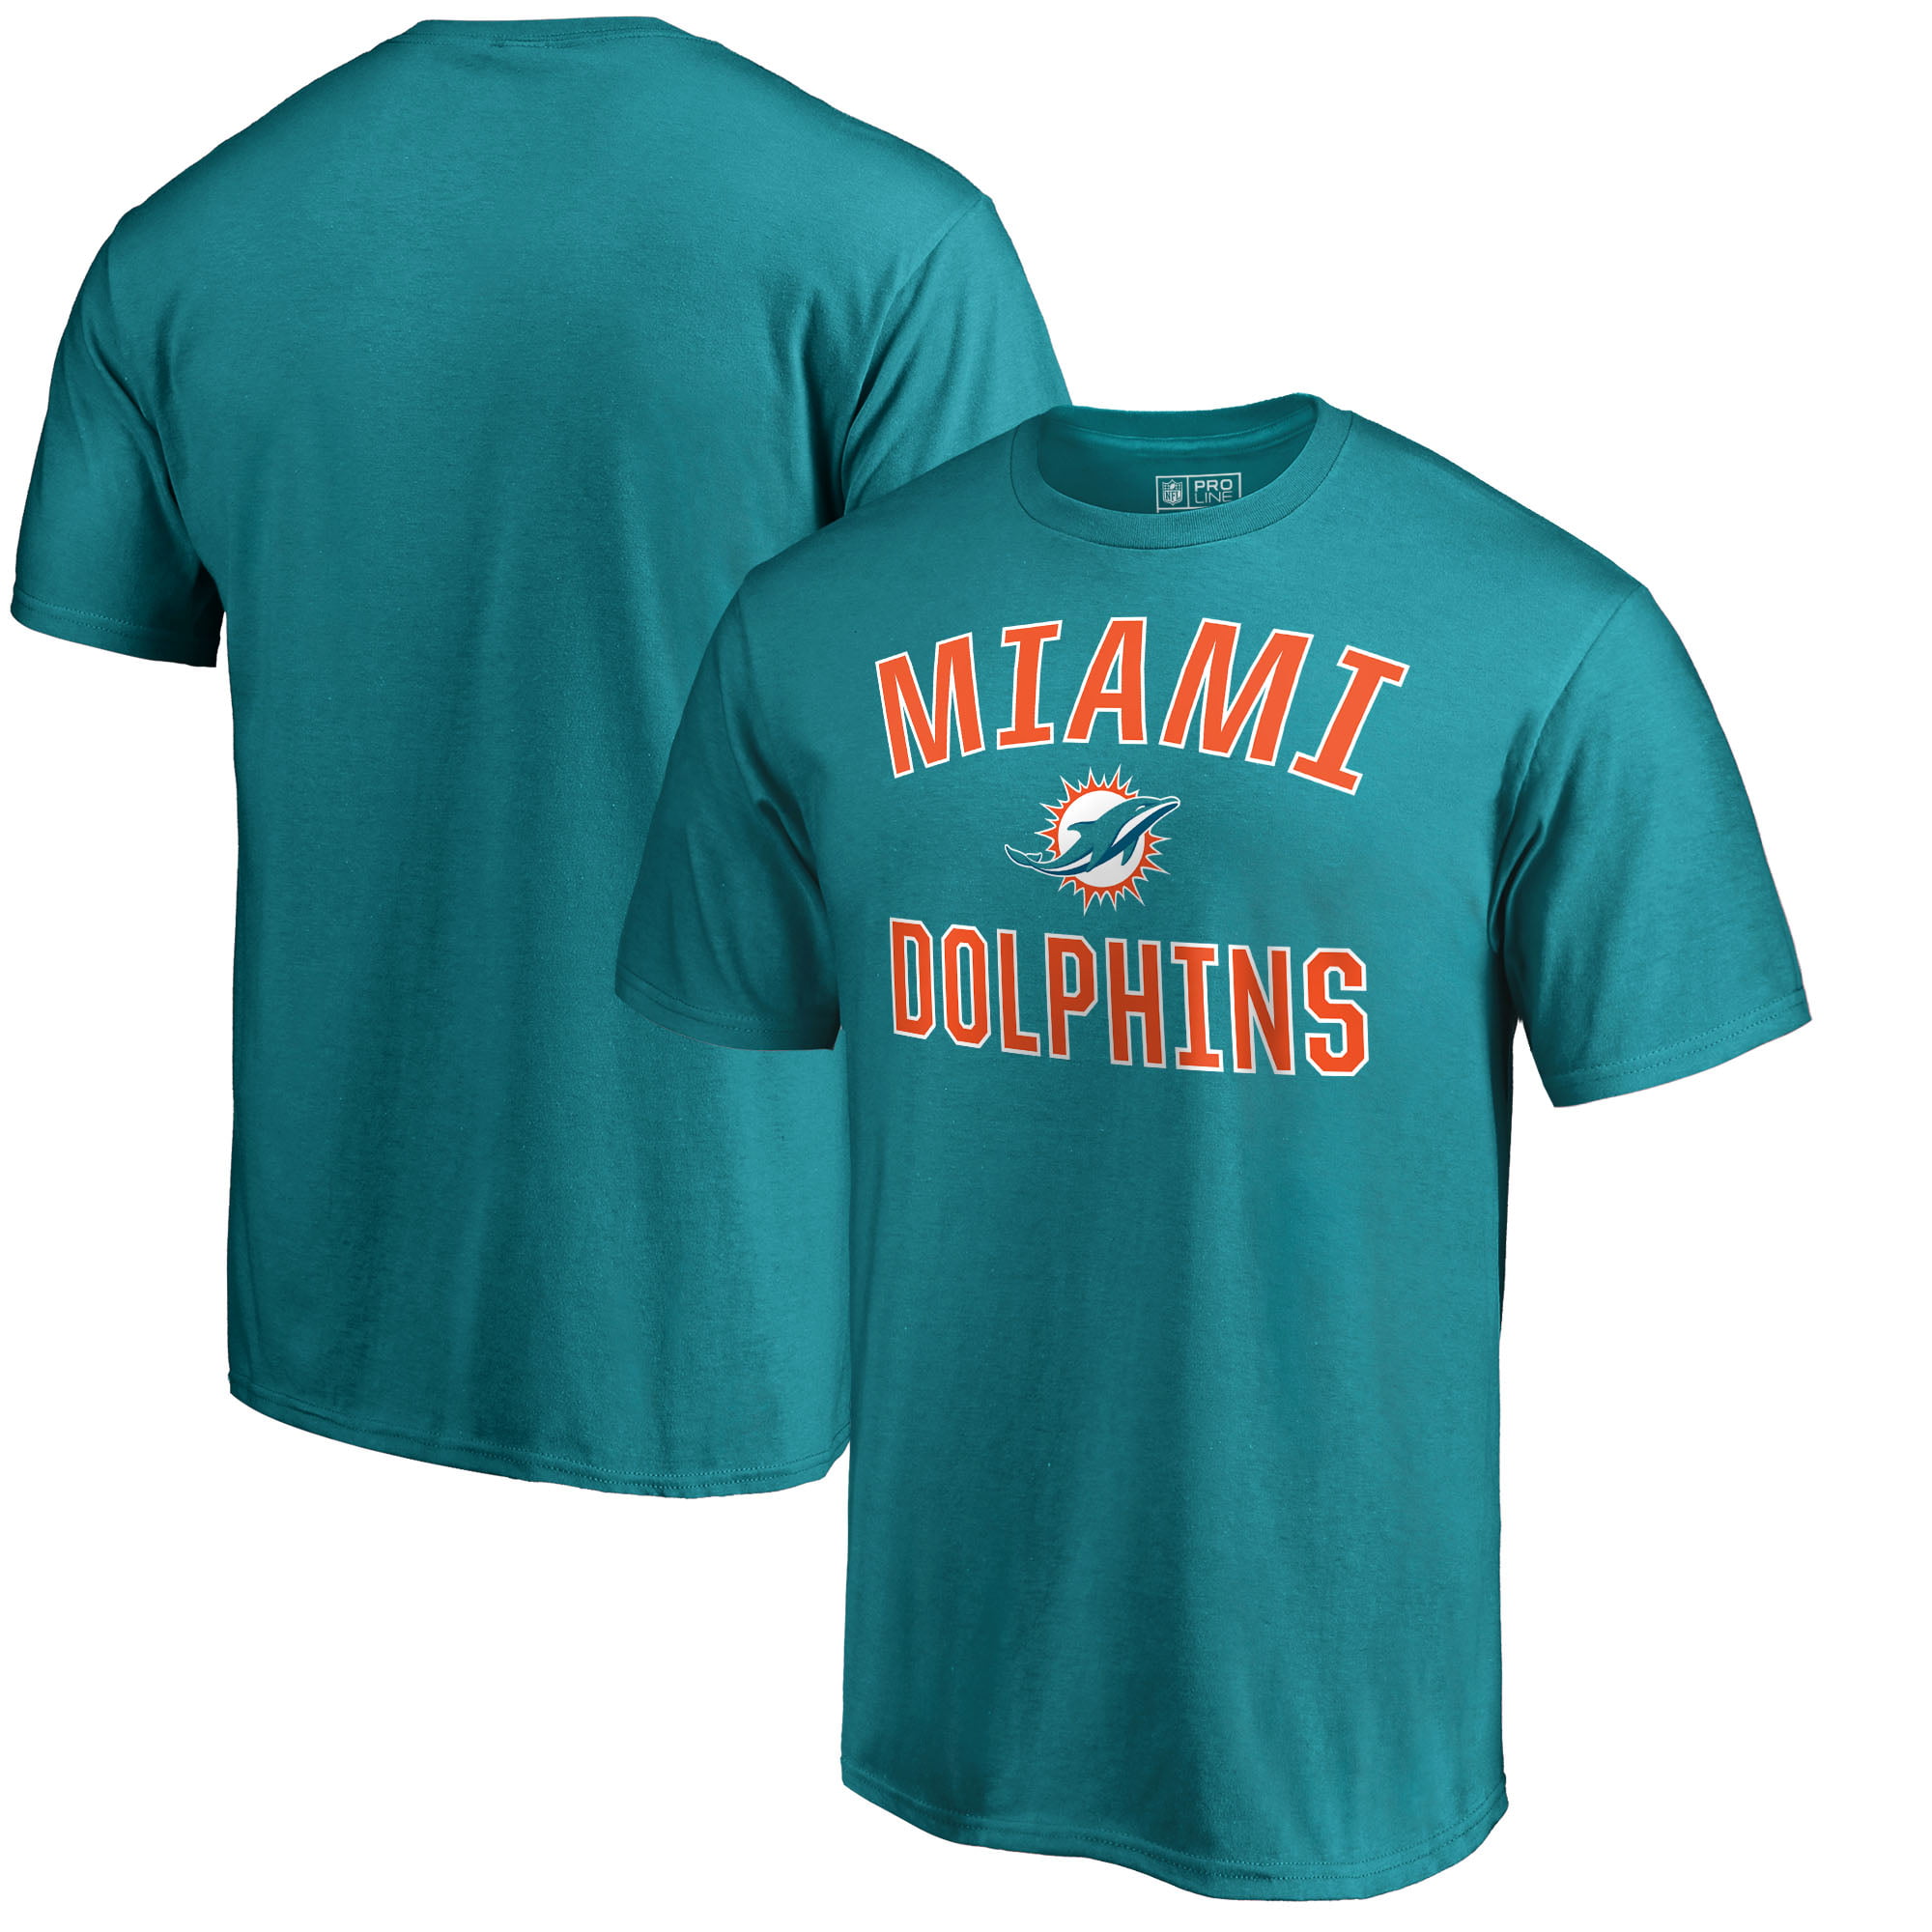 dolphins shirts with new logo